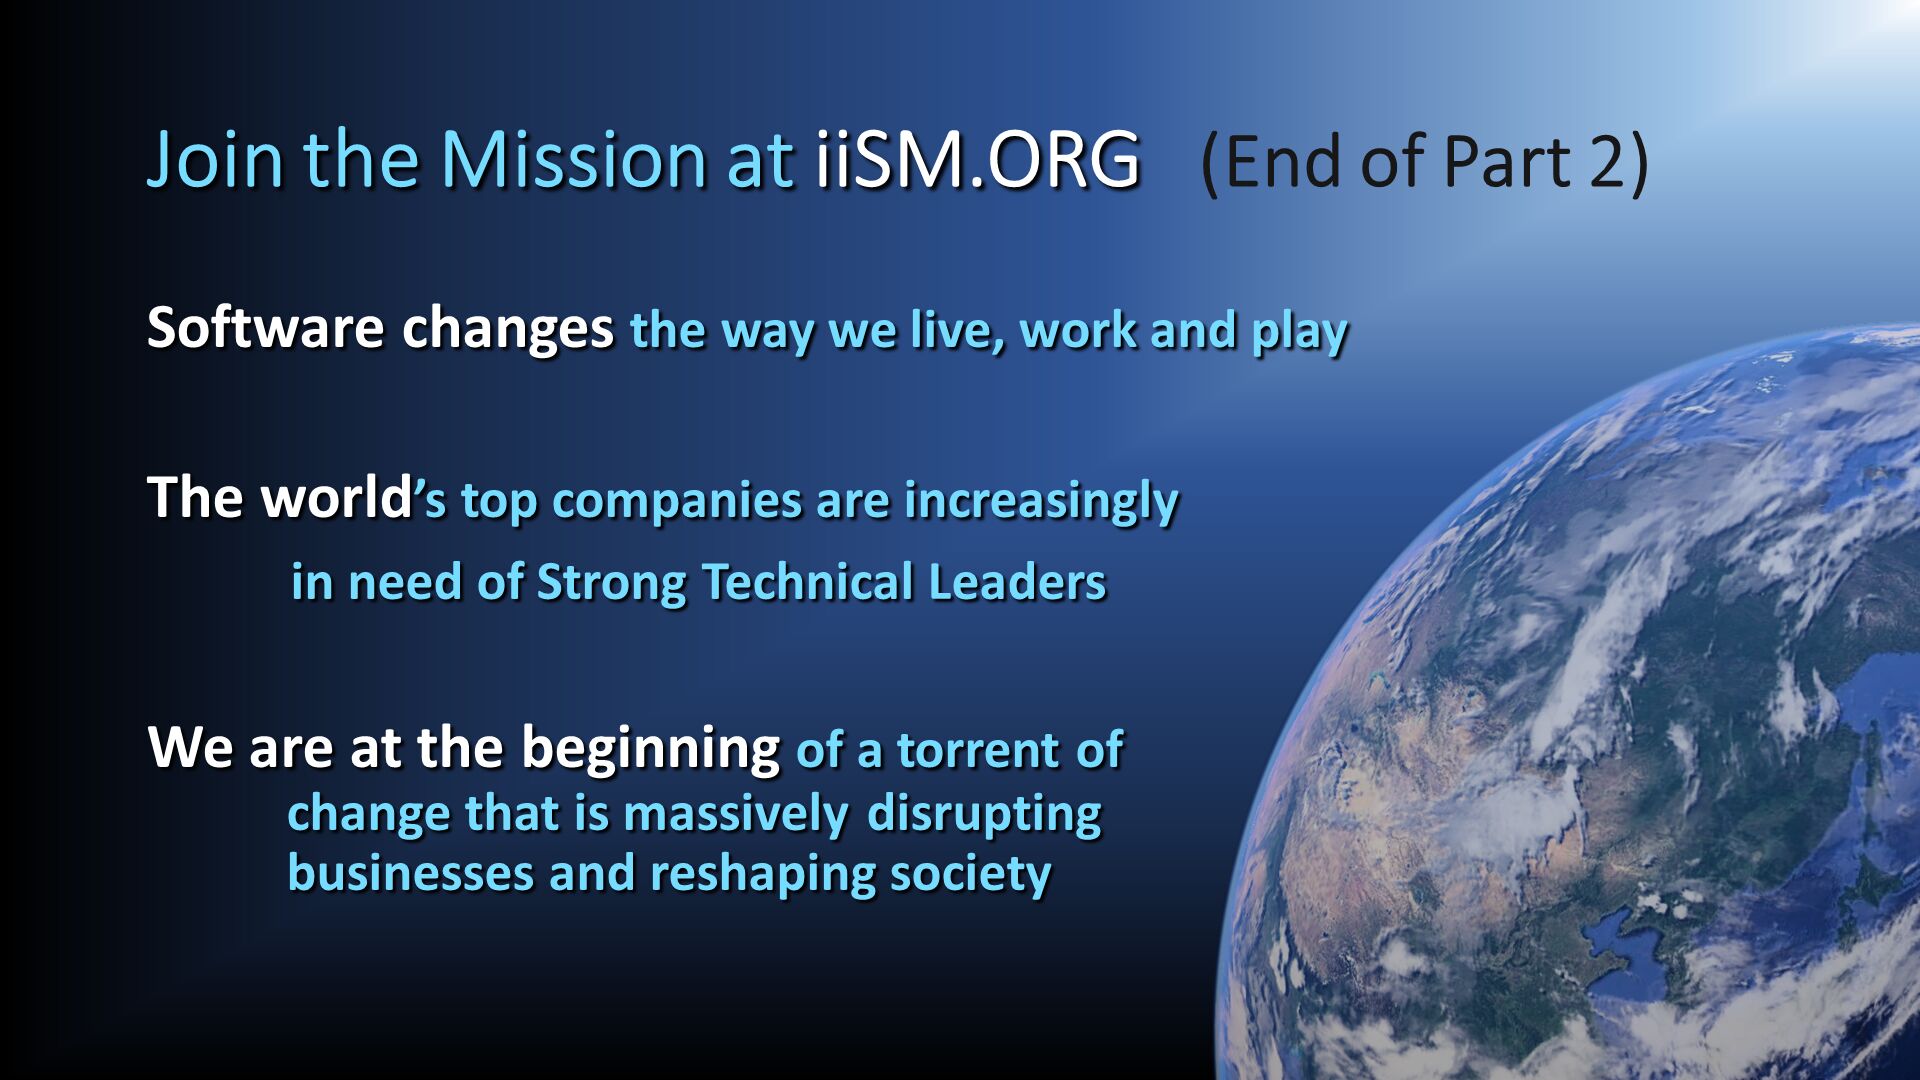 Join the Mission at iiSM.ORG   (End of Part 2). Software changes the way we live, work and play
	 
The world’s top companies are increasingly
	in need of Strong Technical Leaders

We are at the beginning of a torrent of            change that is massively	disrupting            businesses and reshaping society. 